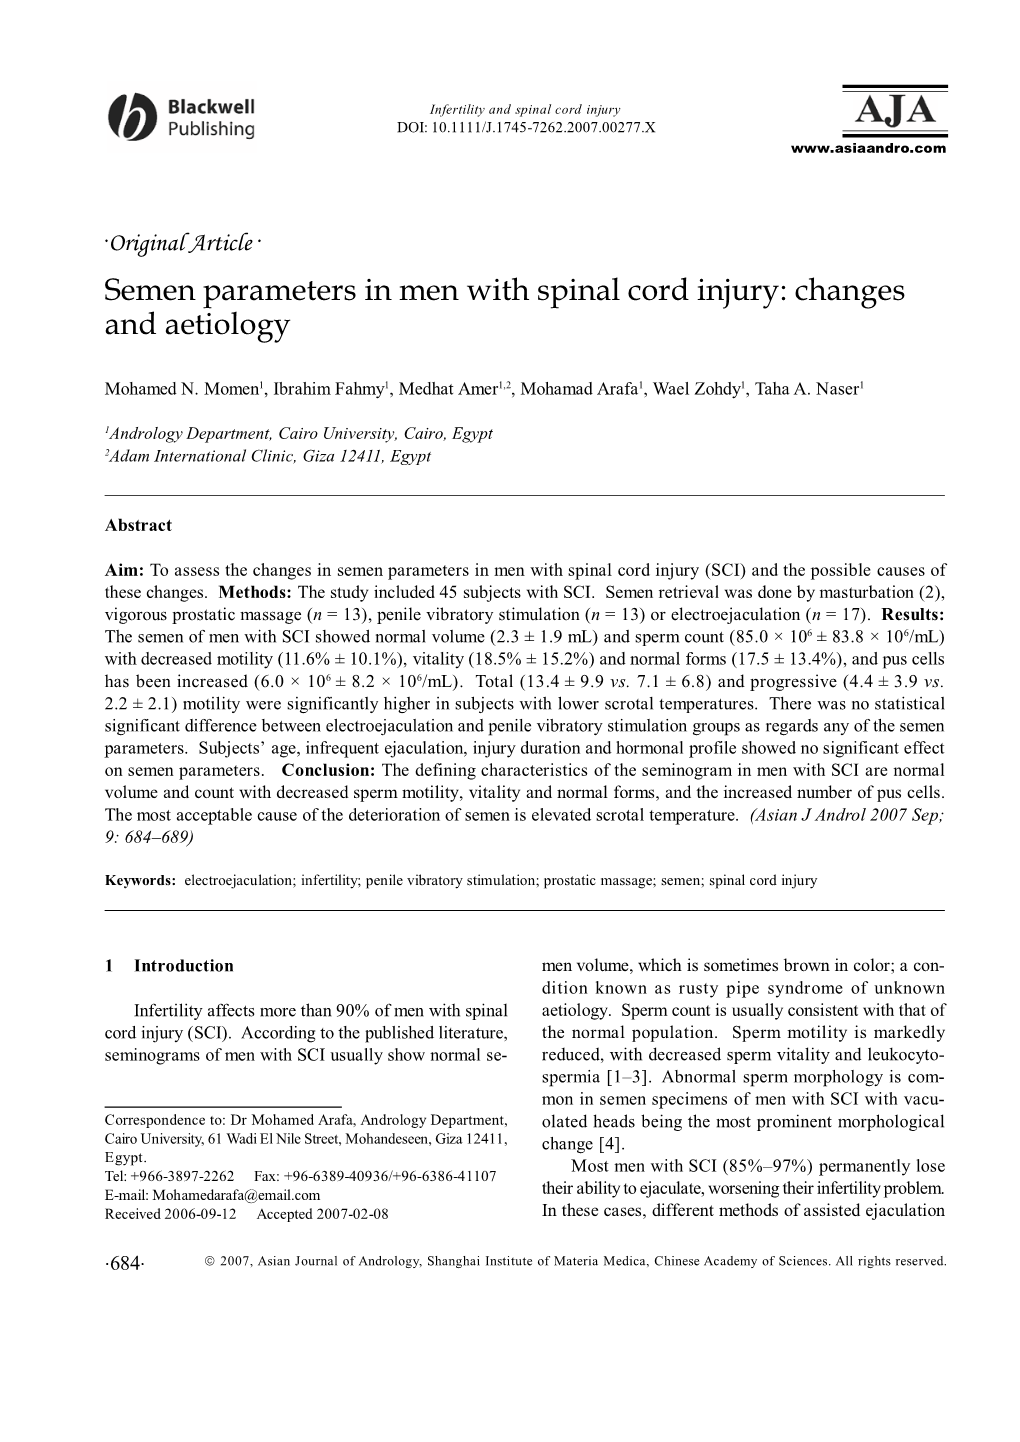 Semen Parameters in Men with Spinal Cord Injury: Changes and Aetiology